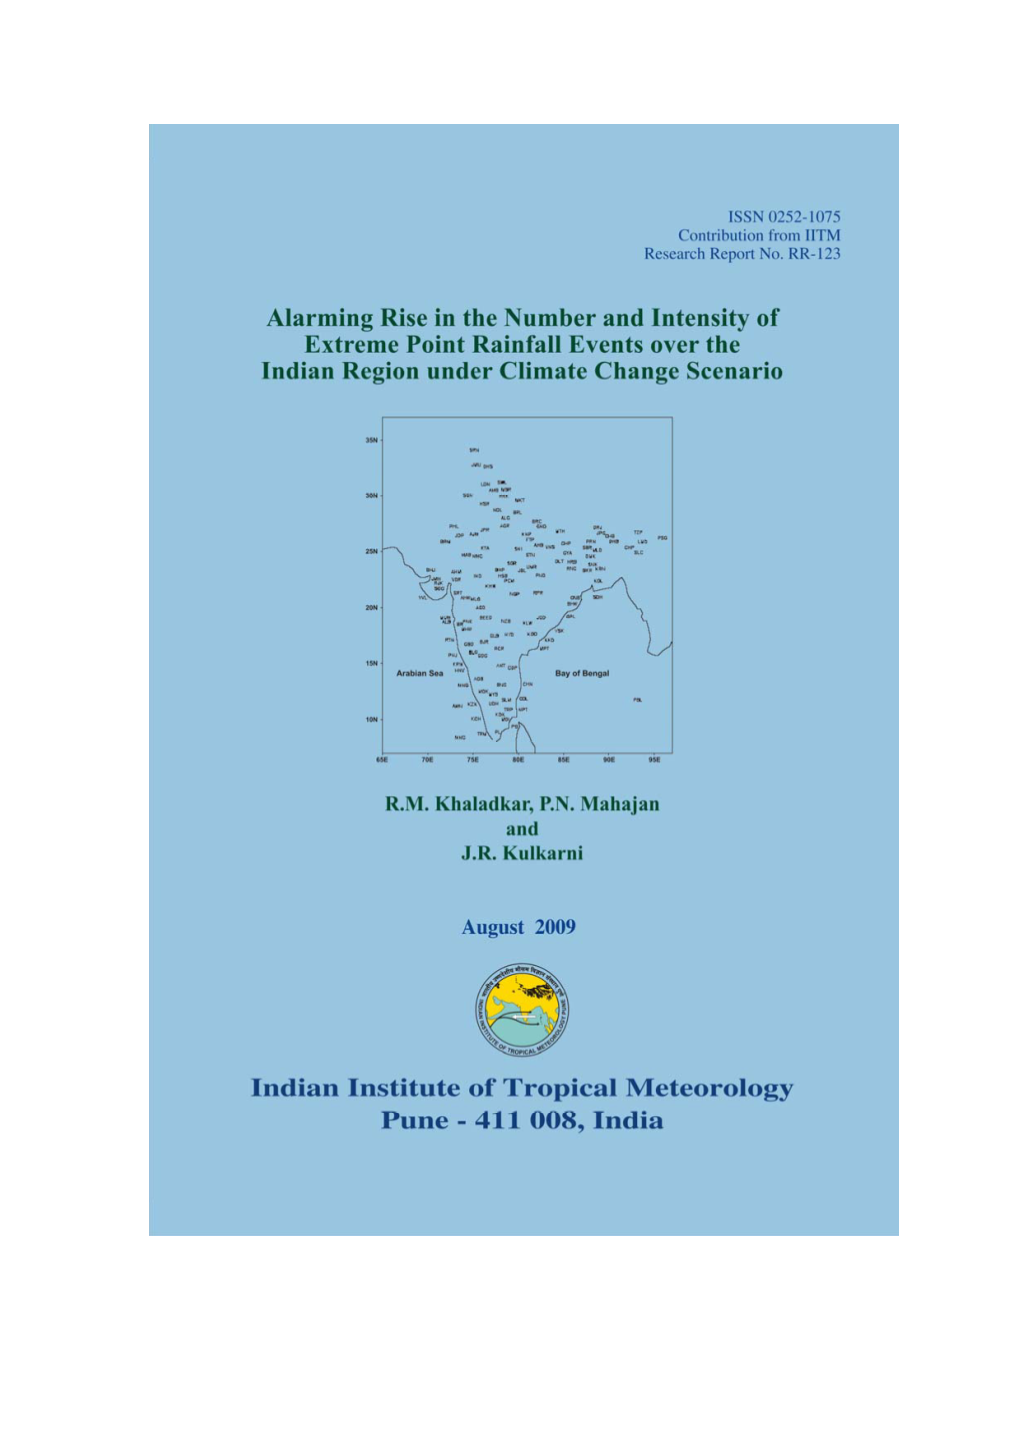 Alarming Rise in the Number and Intensity of Extreme Point Rainfall Events Over the Indian Region Under Climate Change Scenario